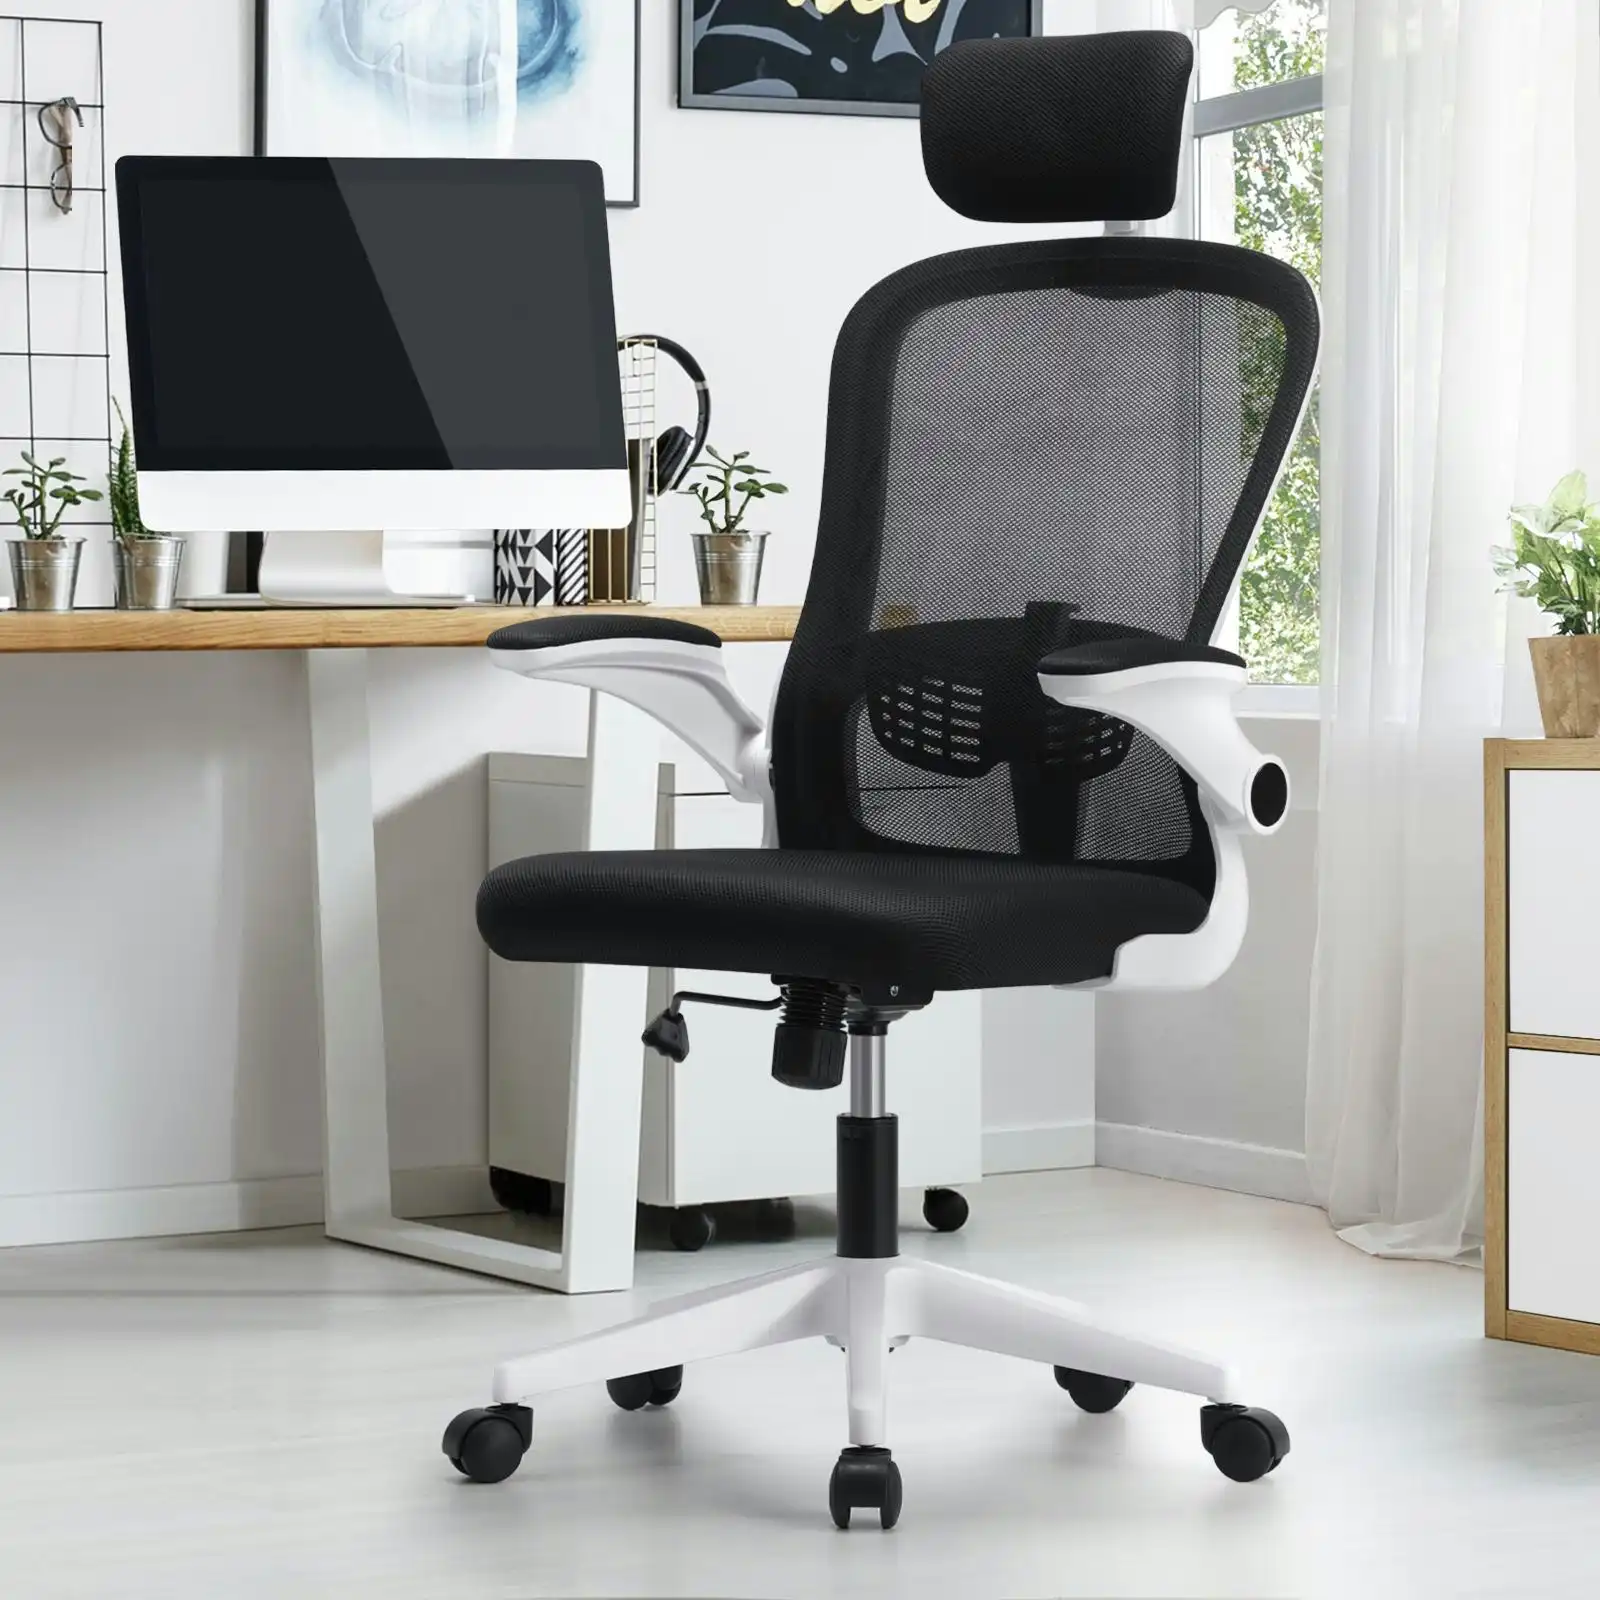 Oikiture Mesh Office Chair Executive Fabric Gaming Seat Racing Computer Black&White